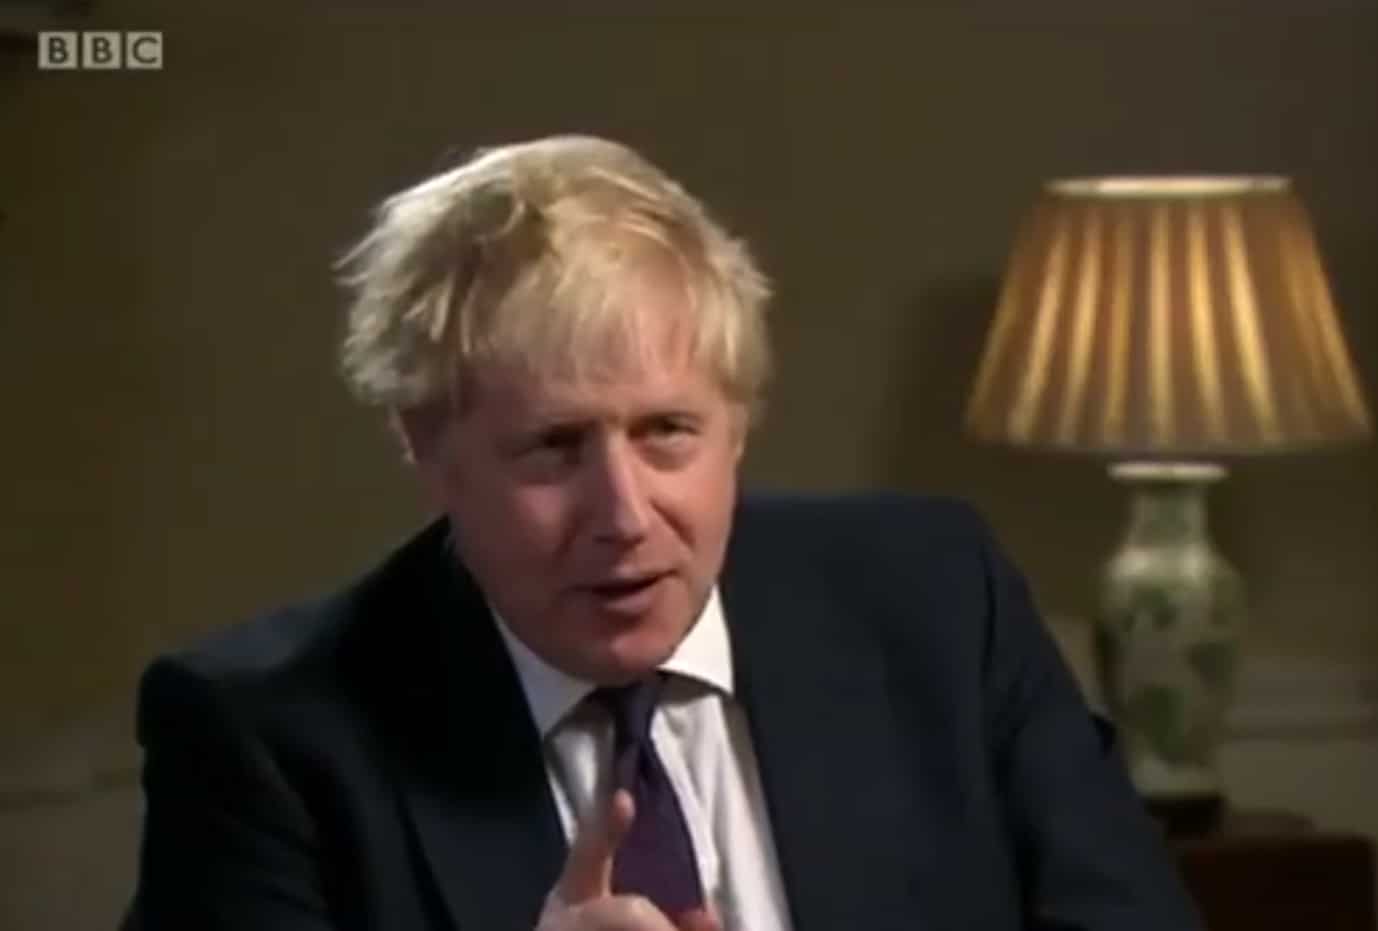 Johnson interview showed a ‘chilling’ disregard for cancer patients